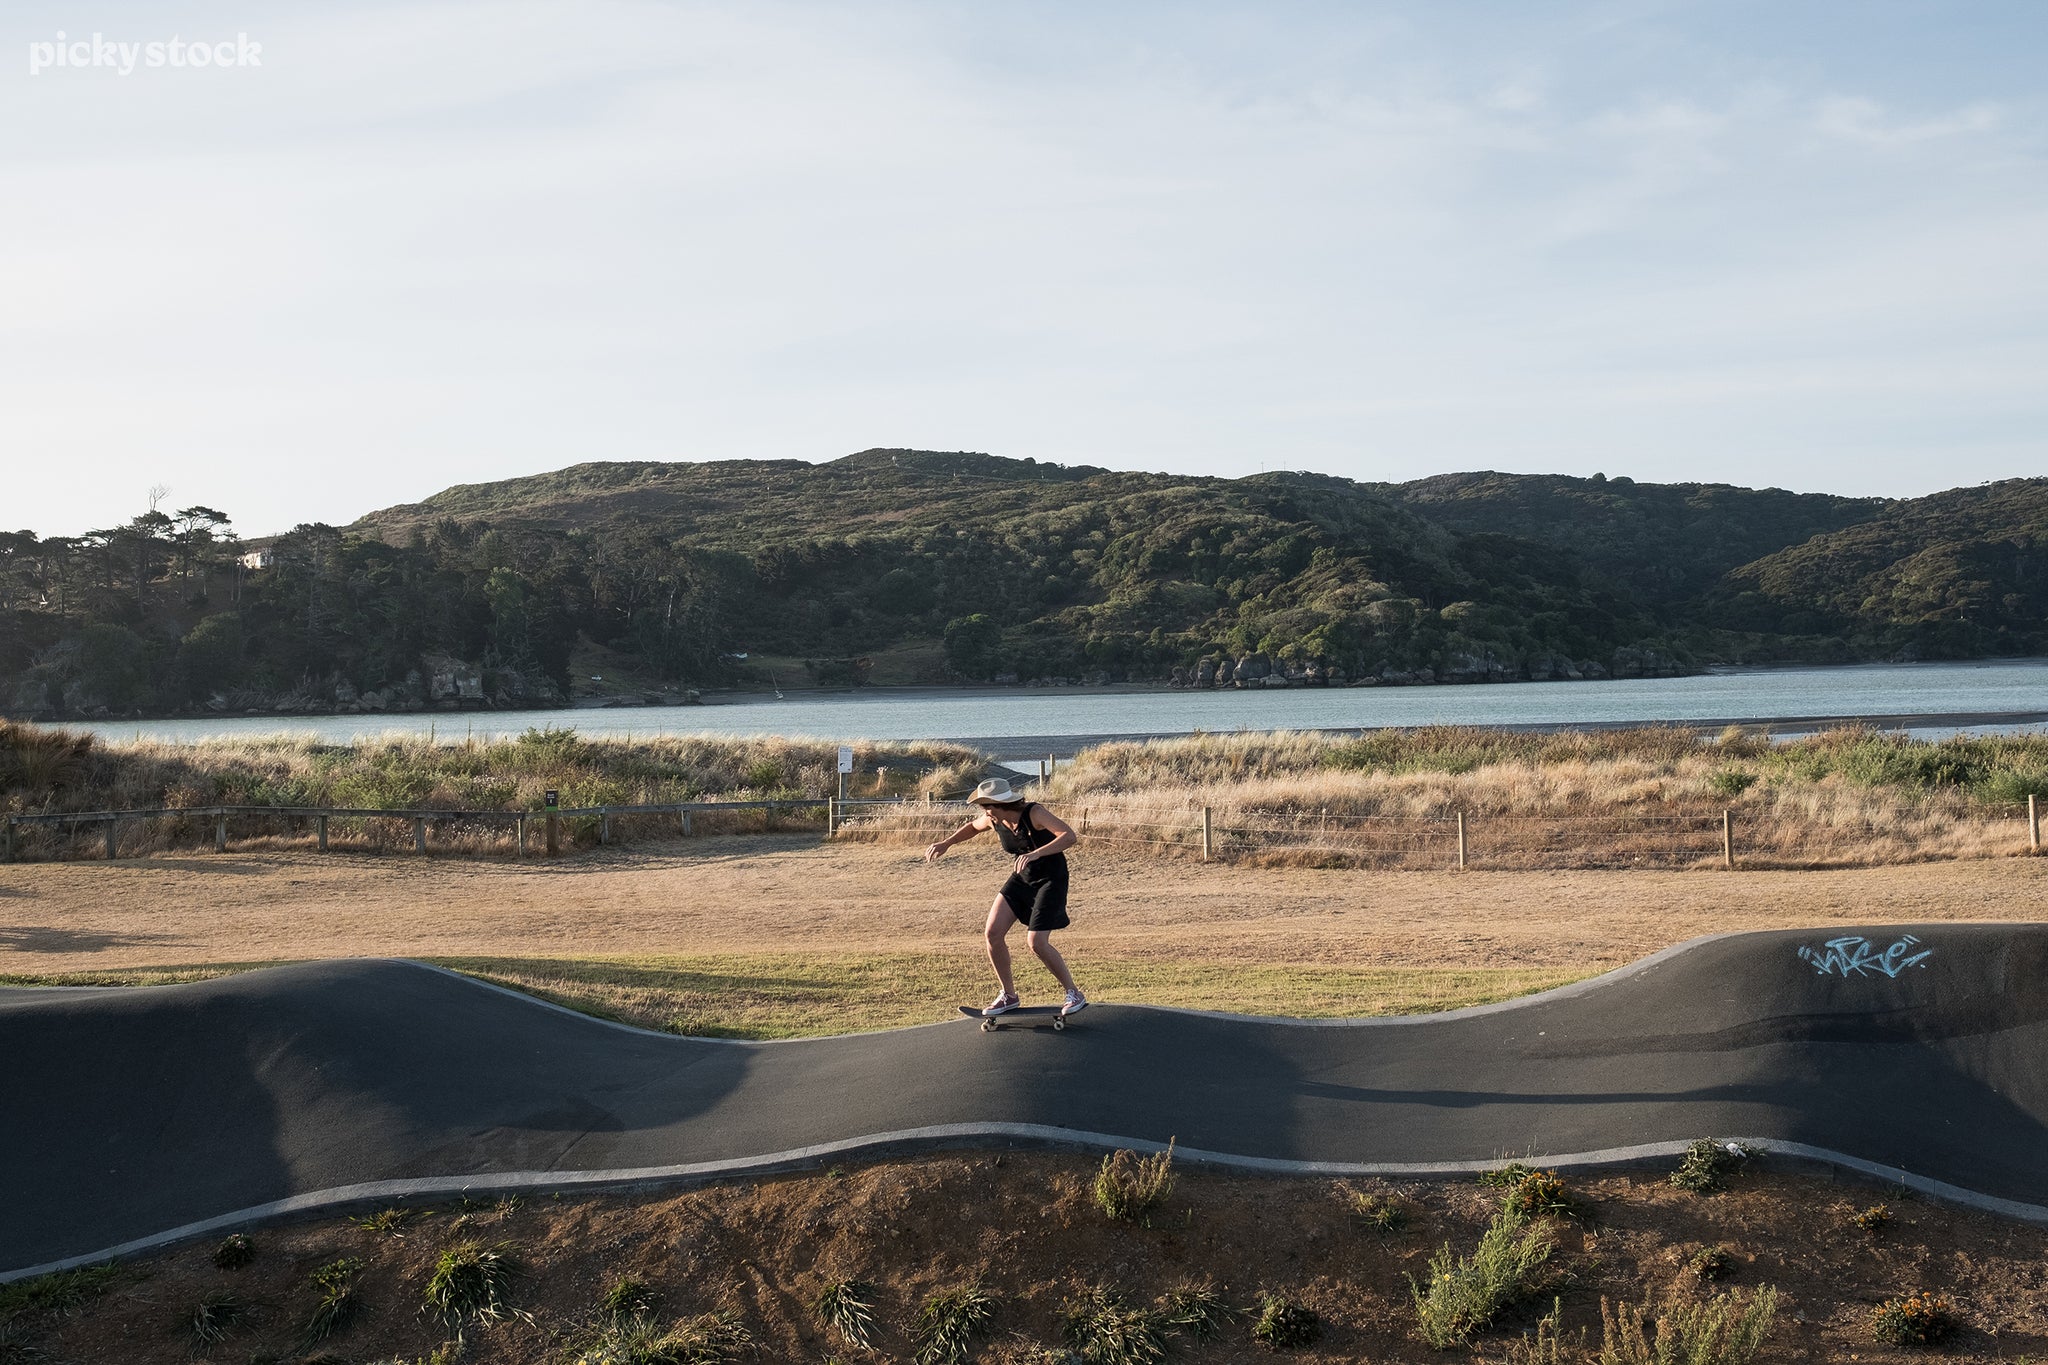 Landscape of a woman in black with pink shoes skateboarding along a skatepark trail surrounded by luscious wild grasses and a wire fence leading towards a body of water.